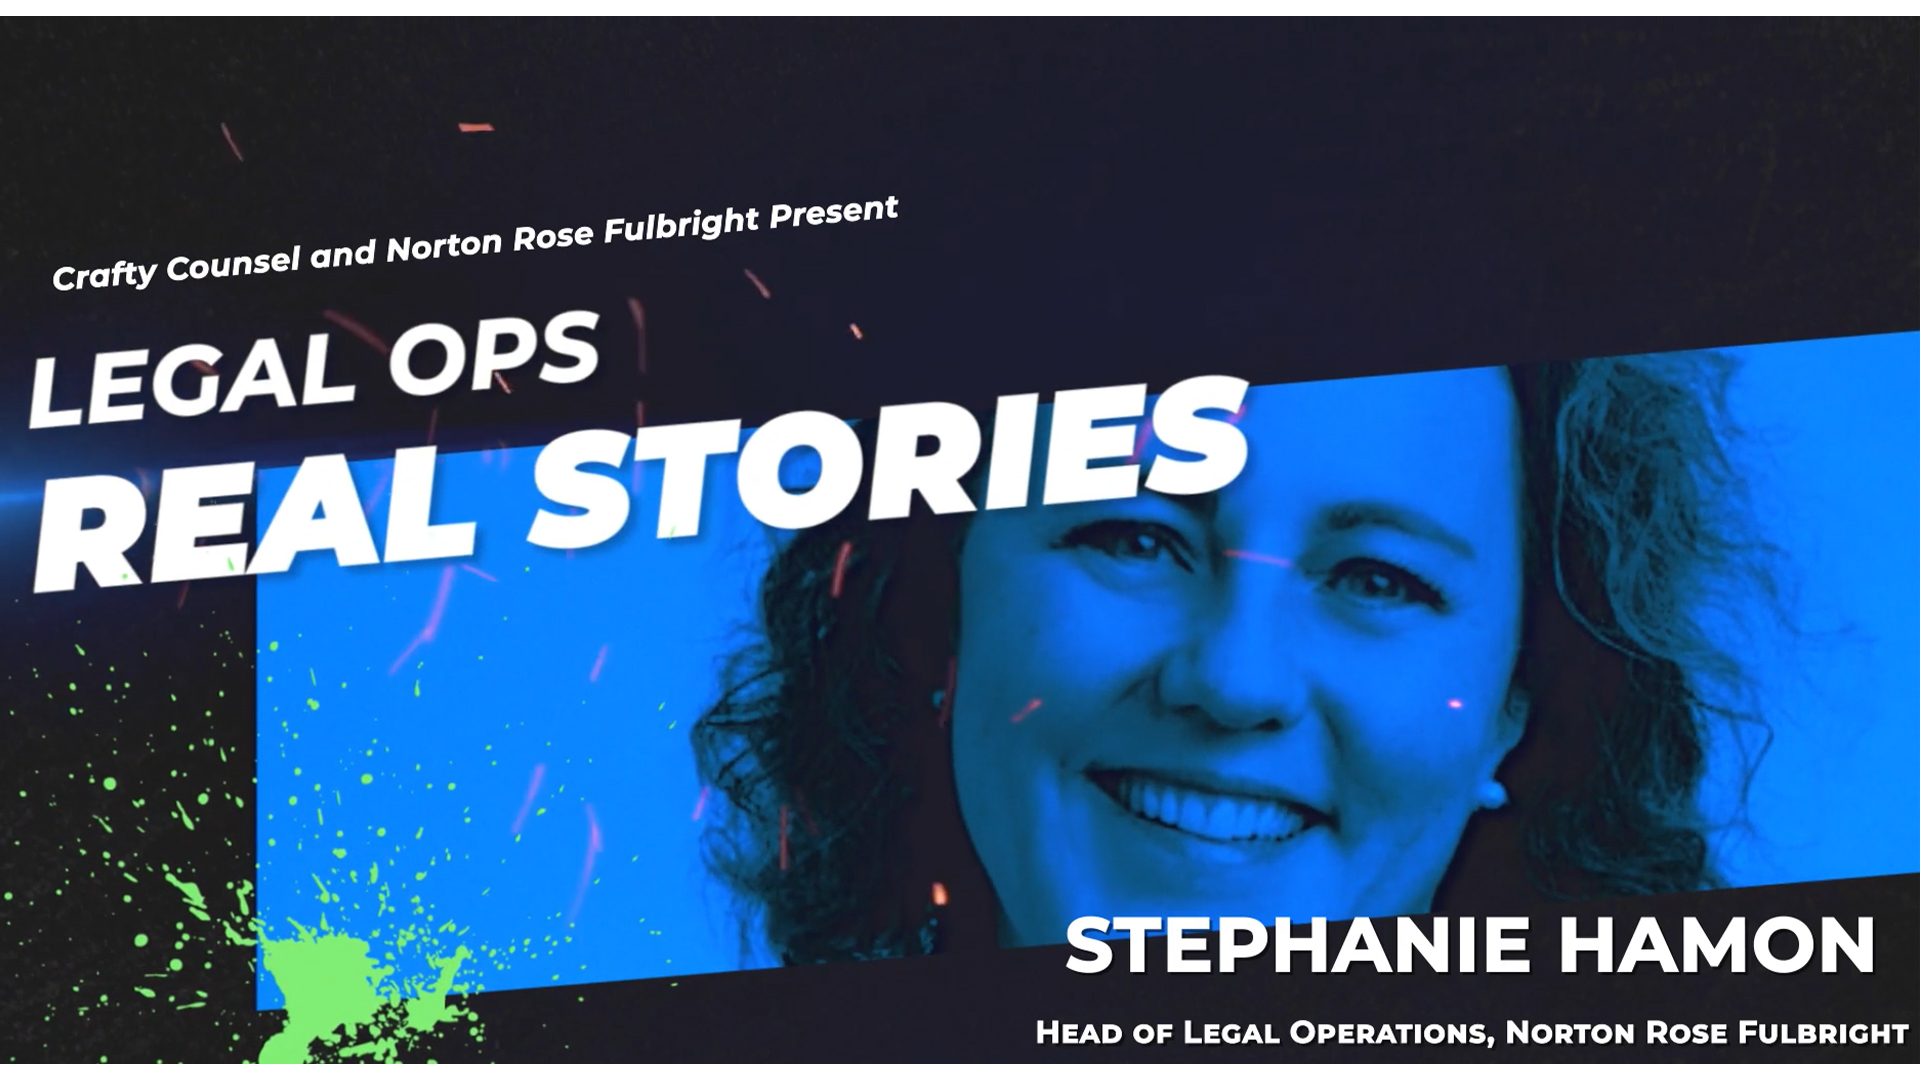 Legal ops stories